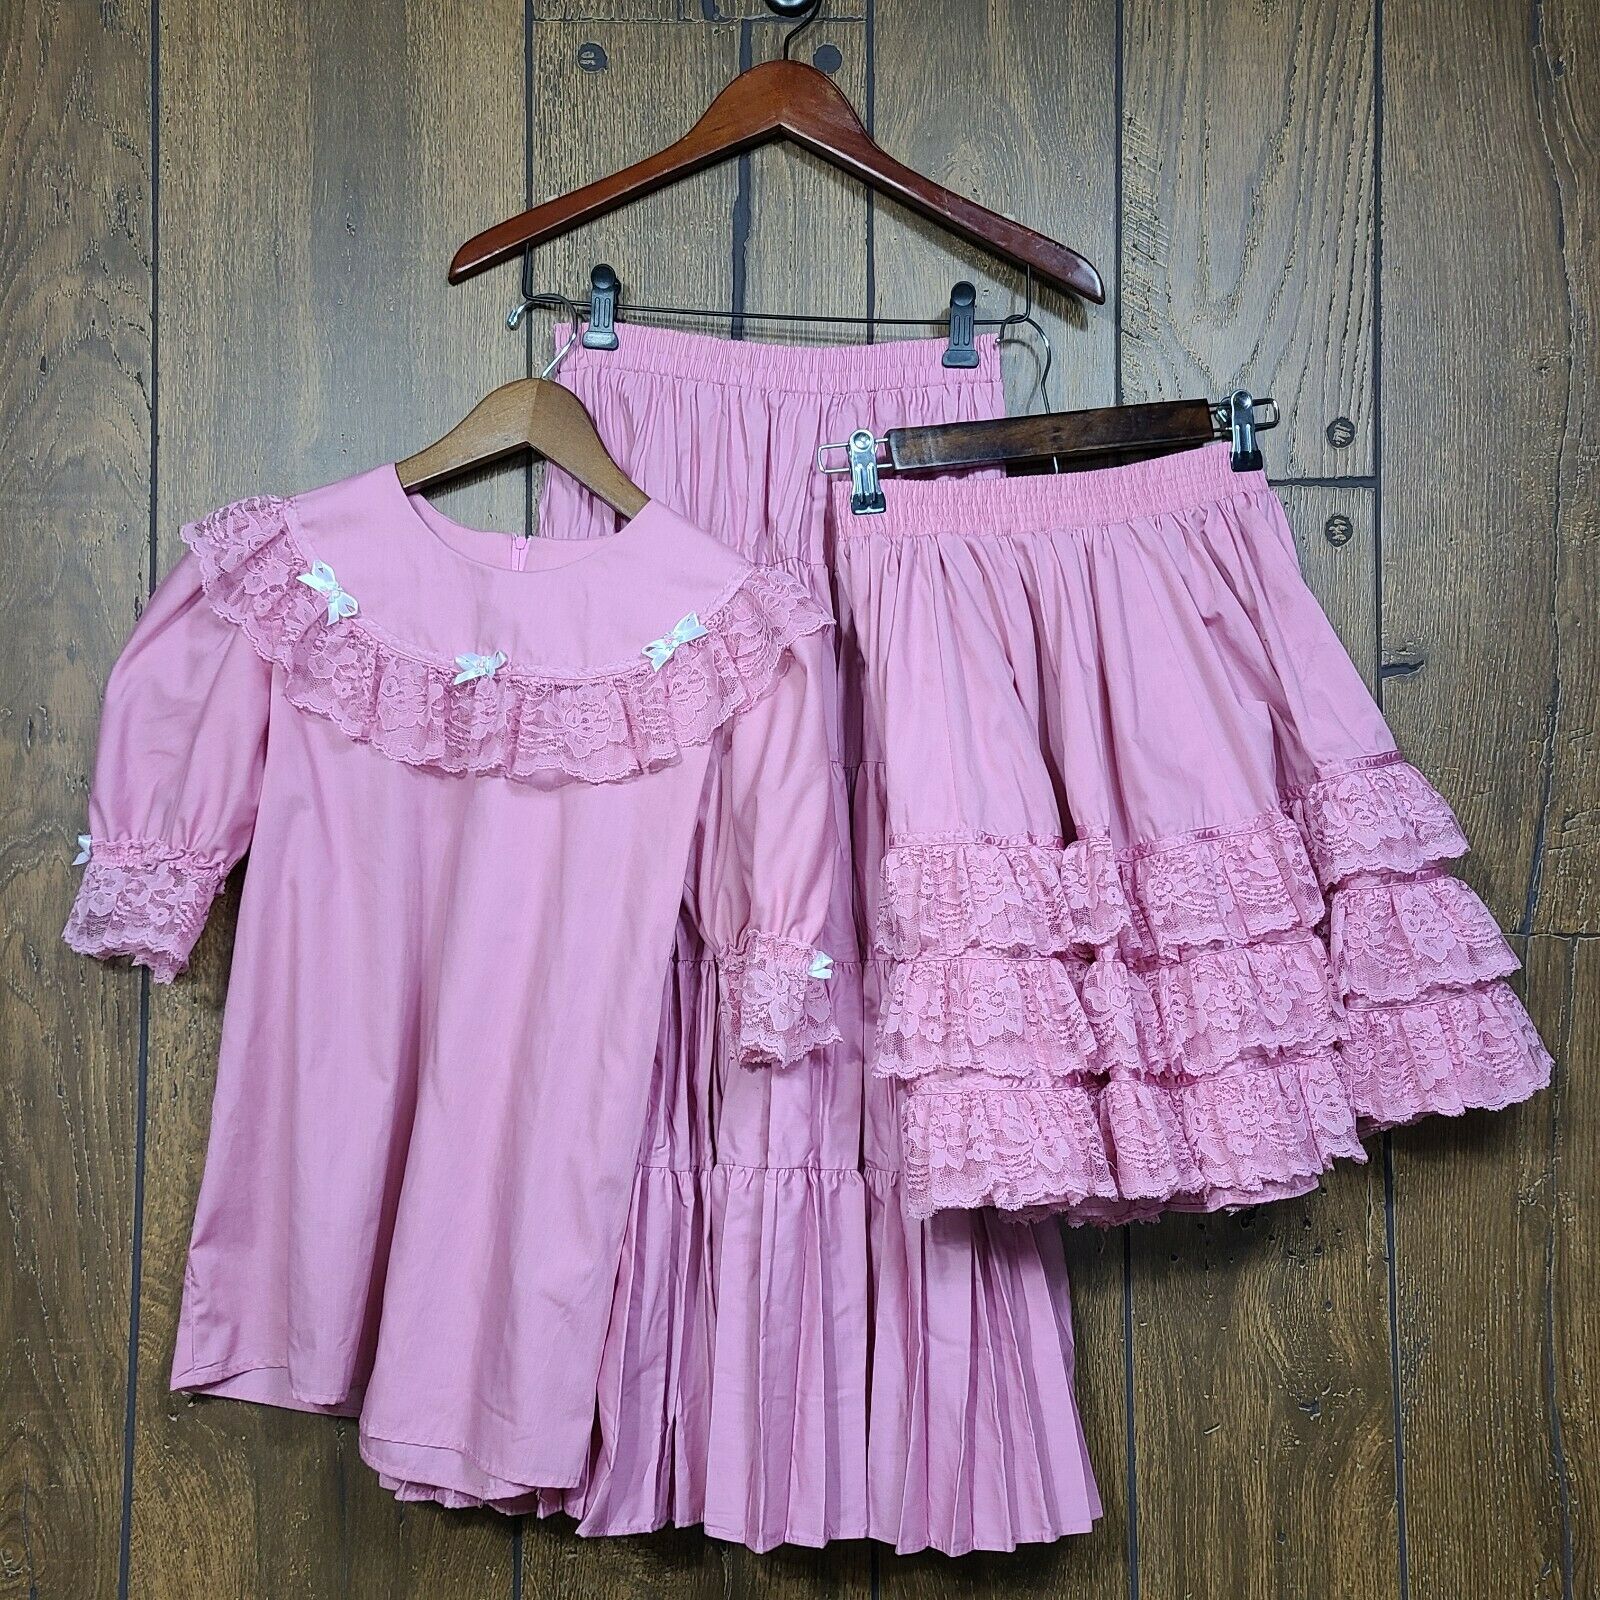 Square Dance Outfit Skirt Blouse Dusty Rose Lace Trim Partners Please Malco READ